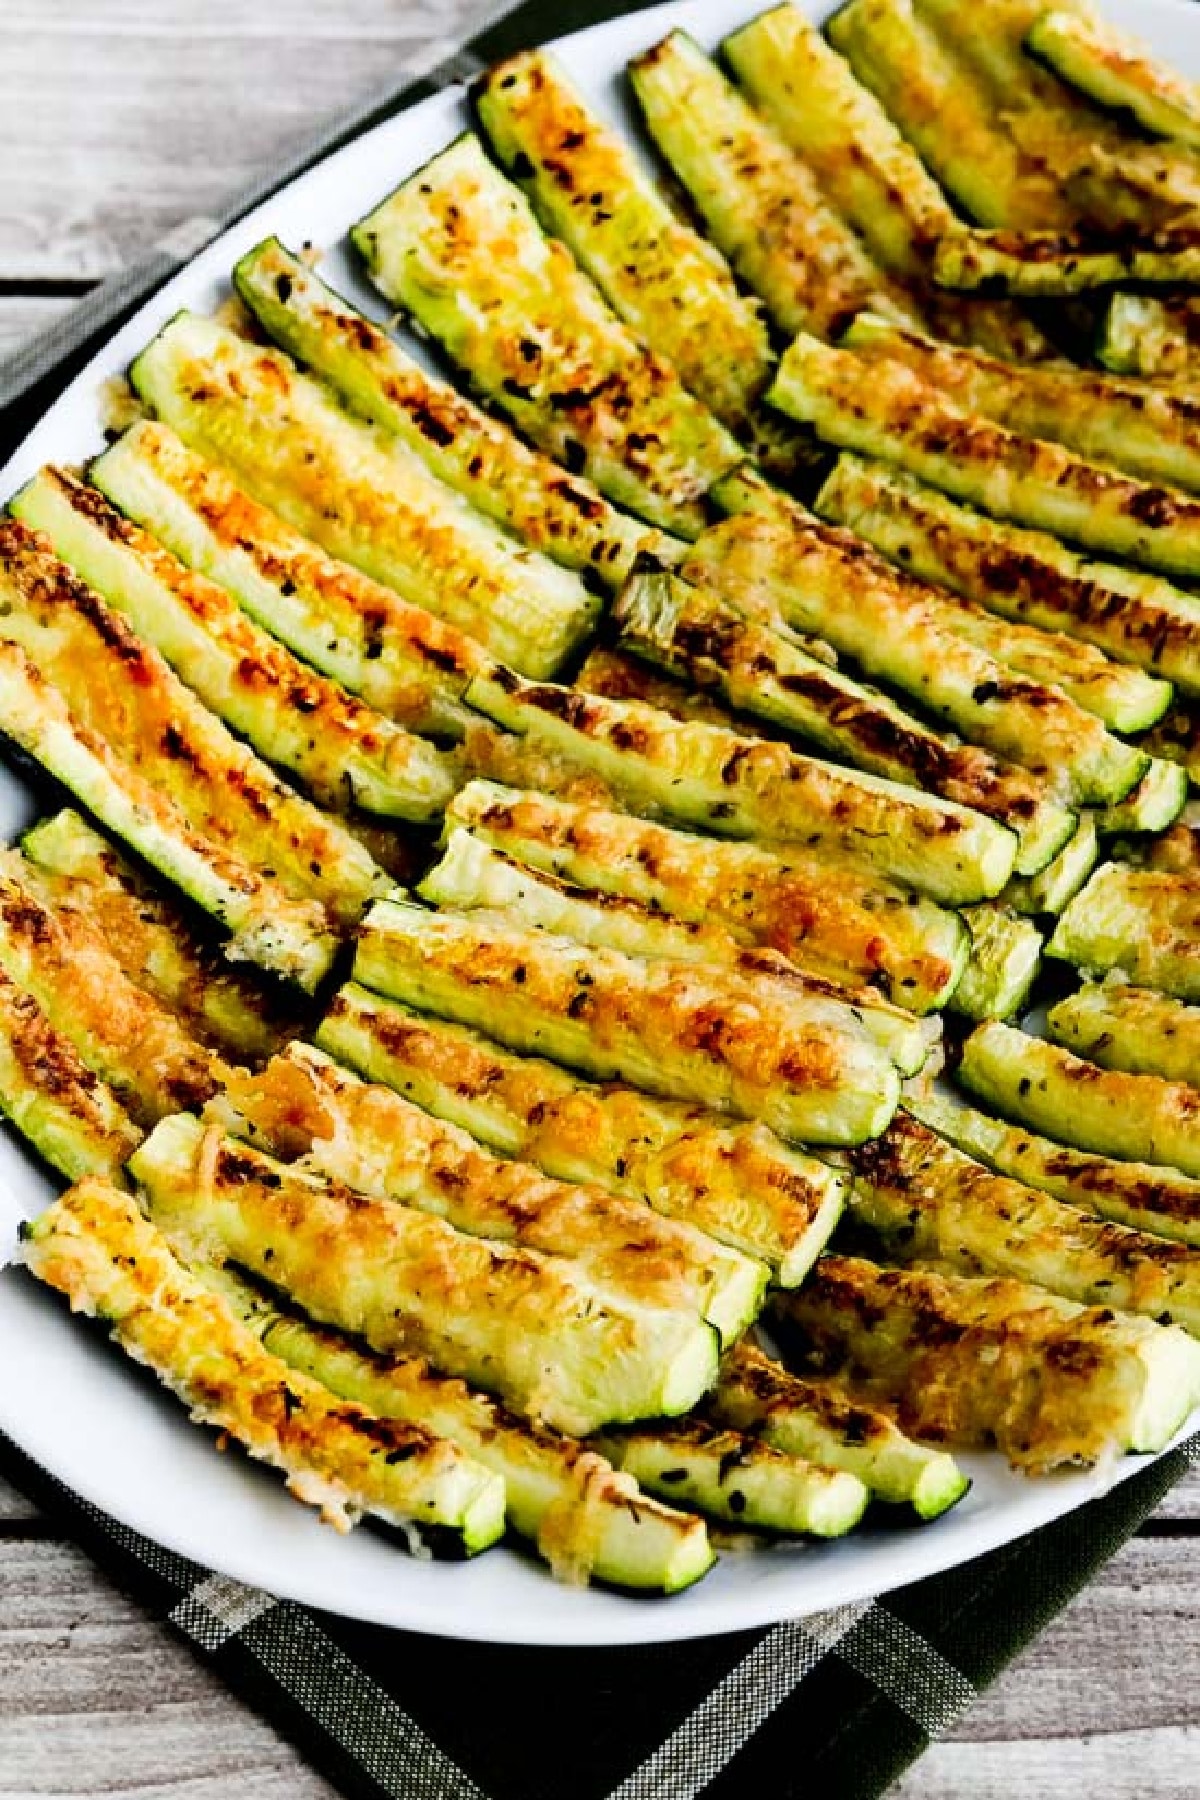 Parmesan Encrusted Zucchini shown on serving plate